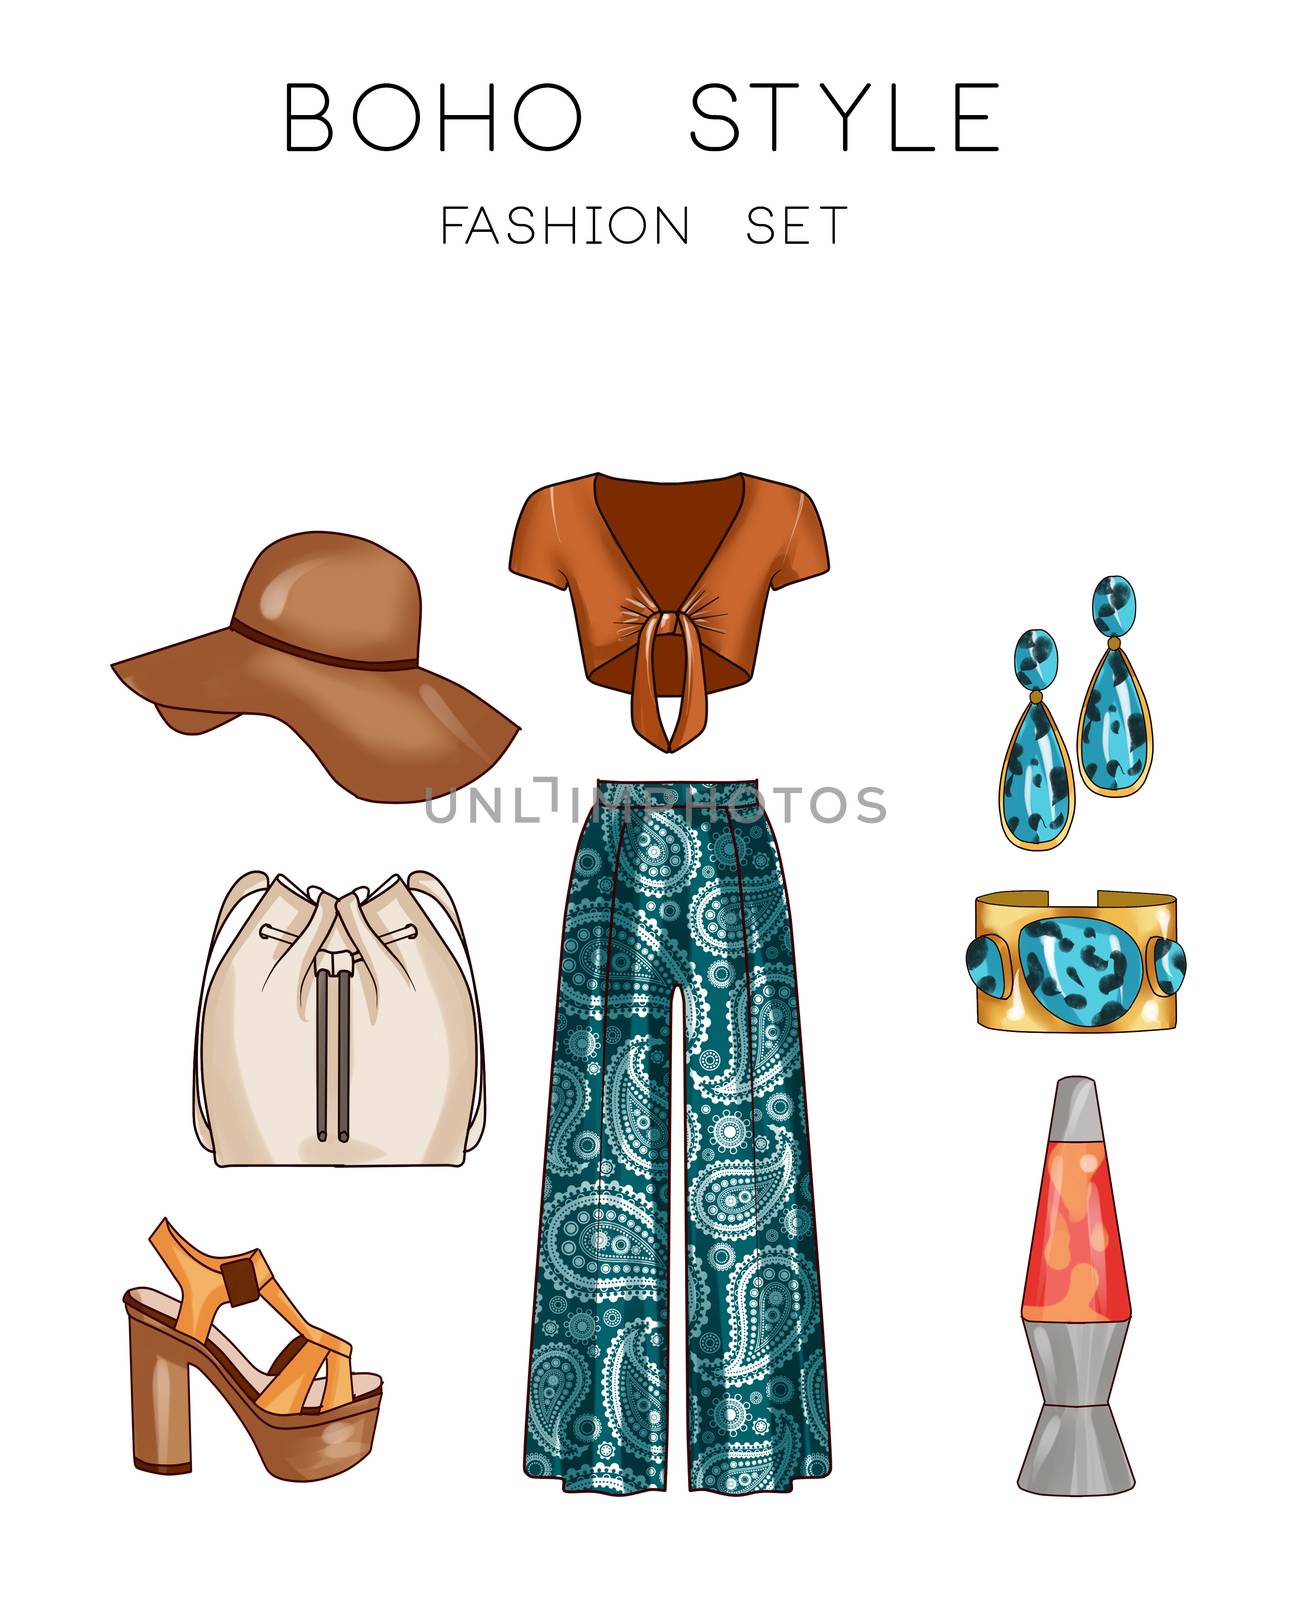 Fashion set of woman's clothes and accessories - Hippie style fashion set by GGillustrations